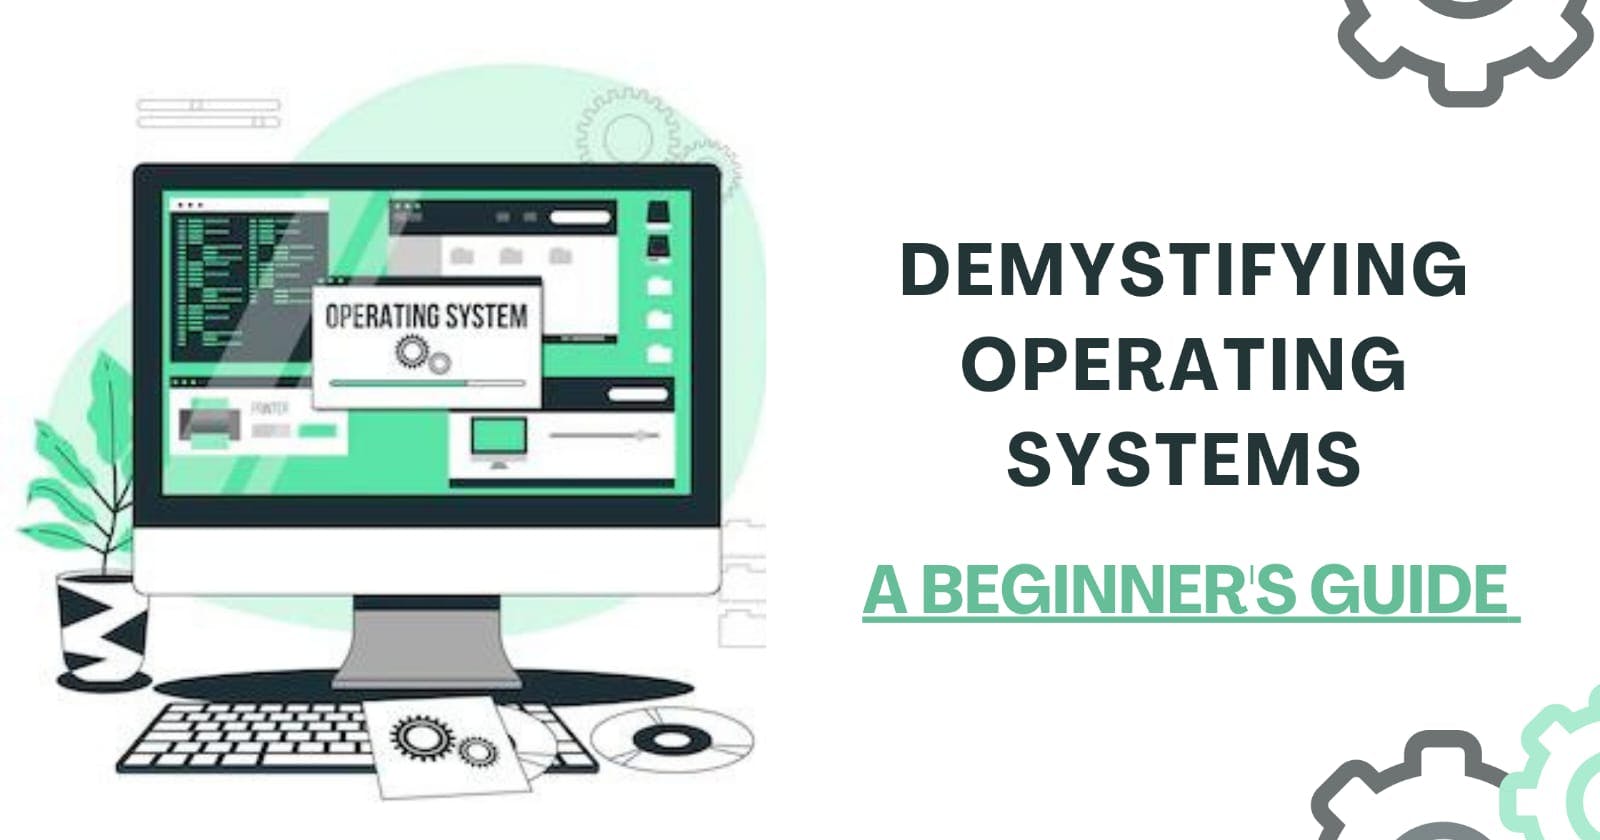 Demystifying Operating Systems: A Beginner's Guide